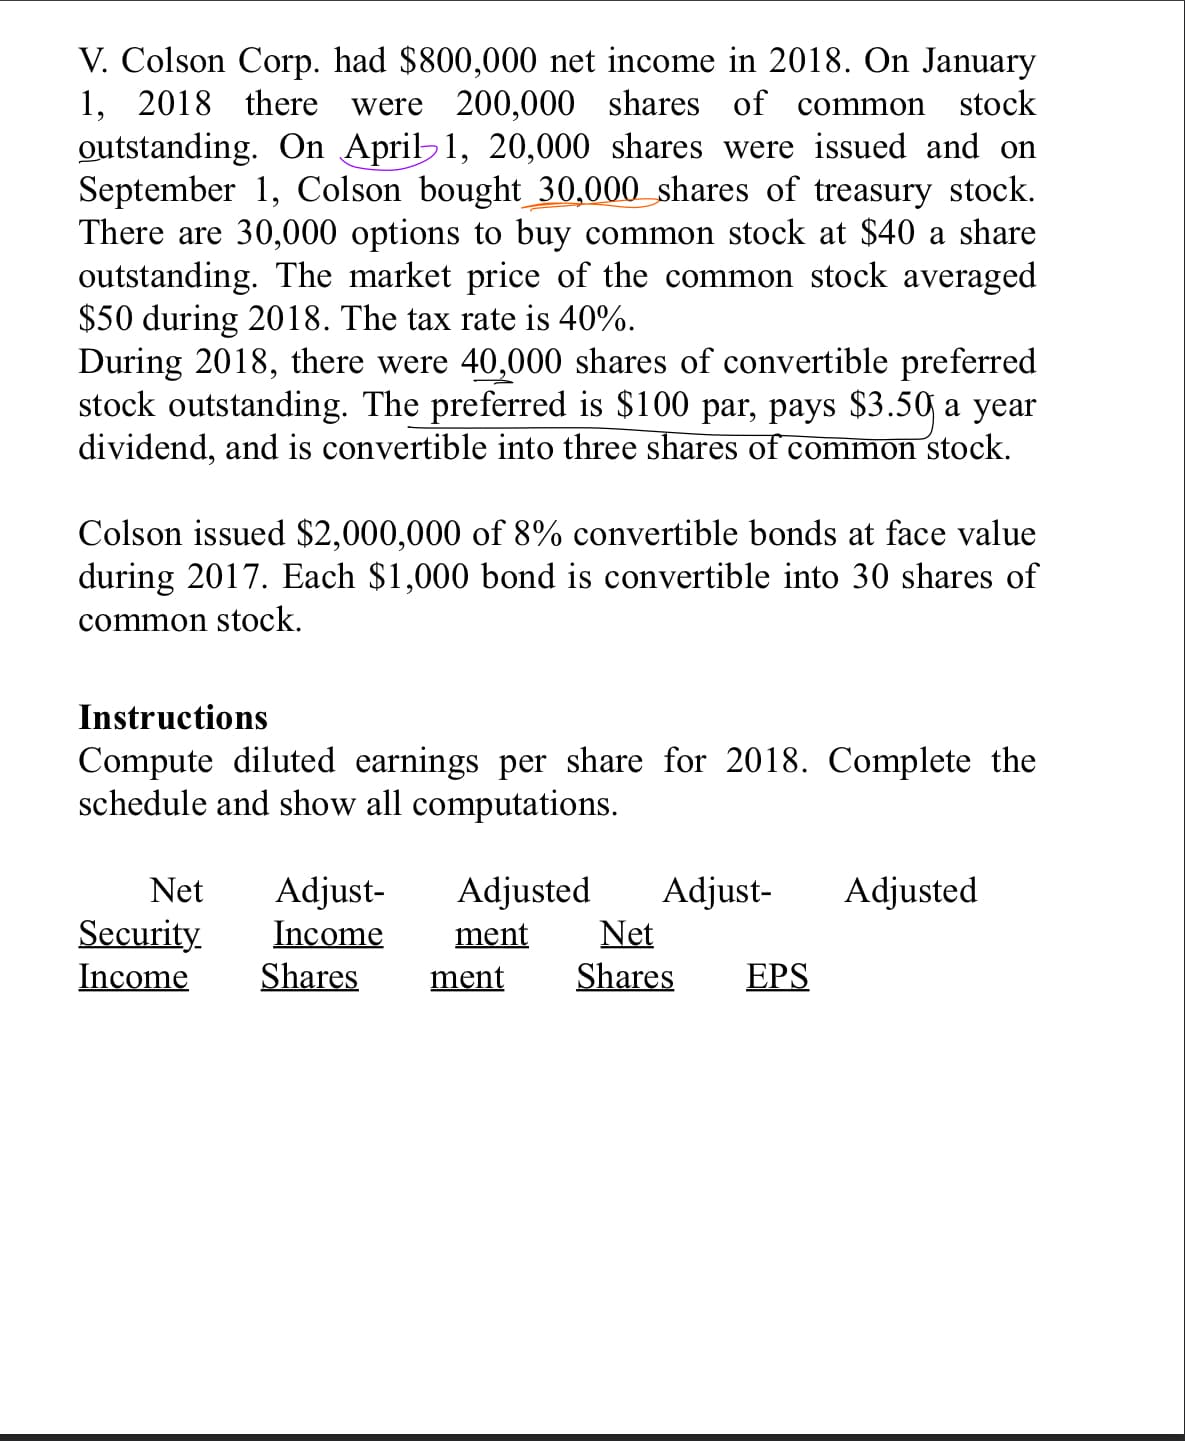 V. Colson Corp. had $800,000 net income in 2018. On January
1, 2018 there
outstanding. On April 1, 20,000 shares were issued and on
September 1, Colson bought_30,000 shares of treasury stock.
There are 30,000 options to buy common stock at $40 a share
outstanding. The market price of the common stock averaged
$50 during 2018. The tax rate is 40%.
During 2018, there were 40,000 shares of convertible preferred
stock outstanding. The preferred is $100 par, pays $3.50 a year
dividend, and is convertible into three shares of common stock.
were 200,000 shares of common
stock
Colson issued $2,000,000 of 8% convertible bonds at face value
during 2017. Each $1,000 bond is convertible into 30 shares of
common stock.
Instructions
Compute diluted earnings per share for 2018. Complete the
schedule and show all computations.
Adjust-
Income
Shares
Adjusted
Adjusted
Adjust-
Net
Shares
Net
Security
Income
ment
ment
EPS
